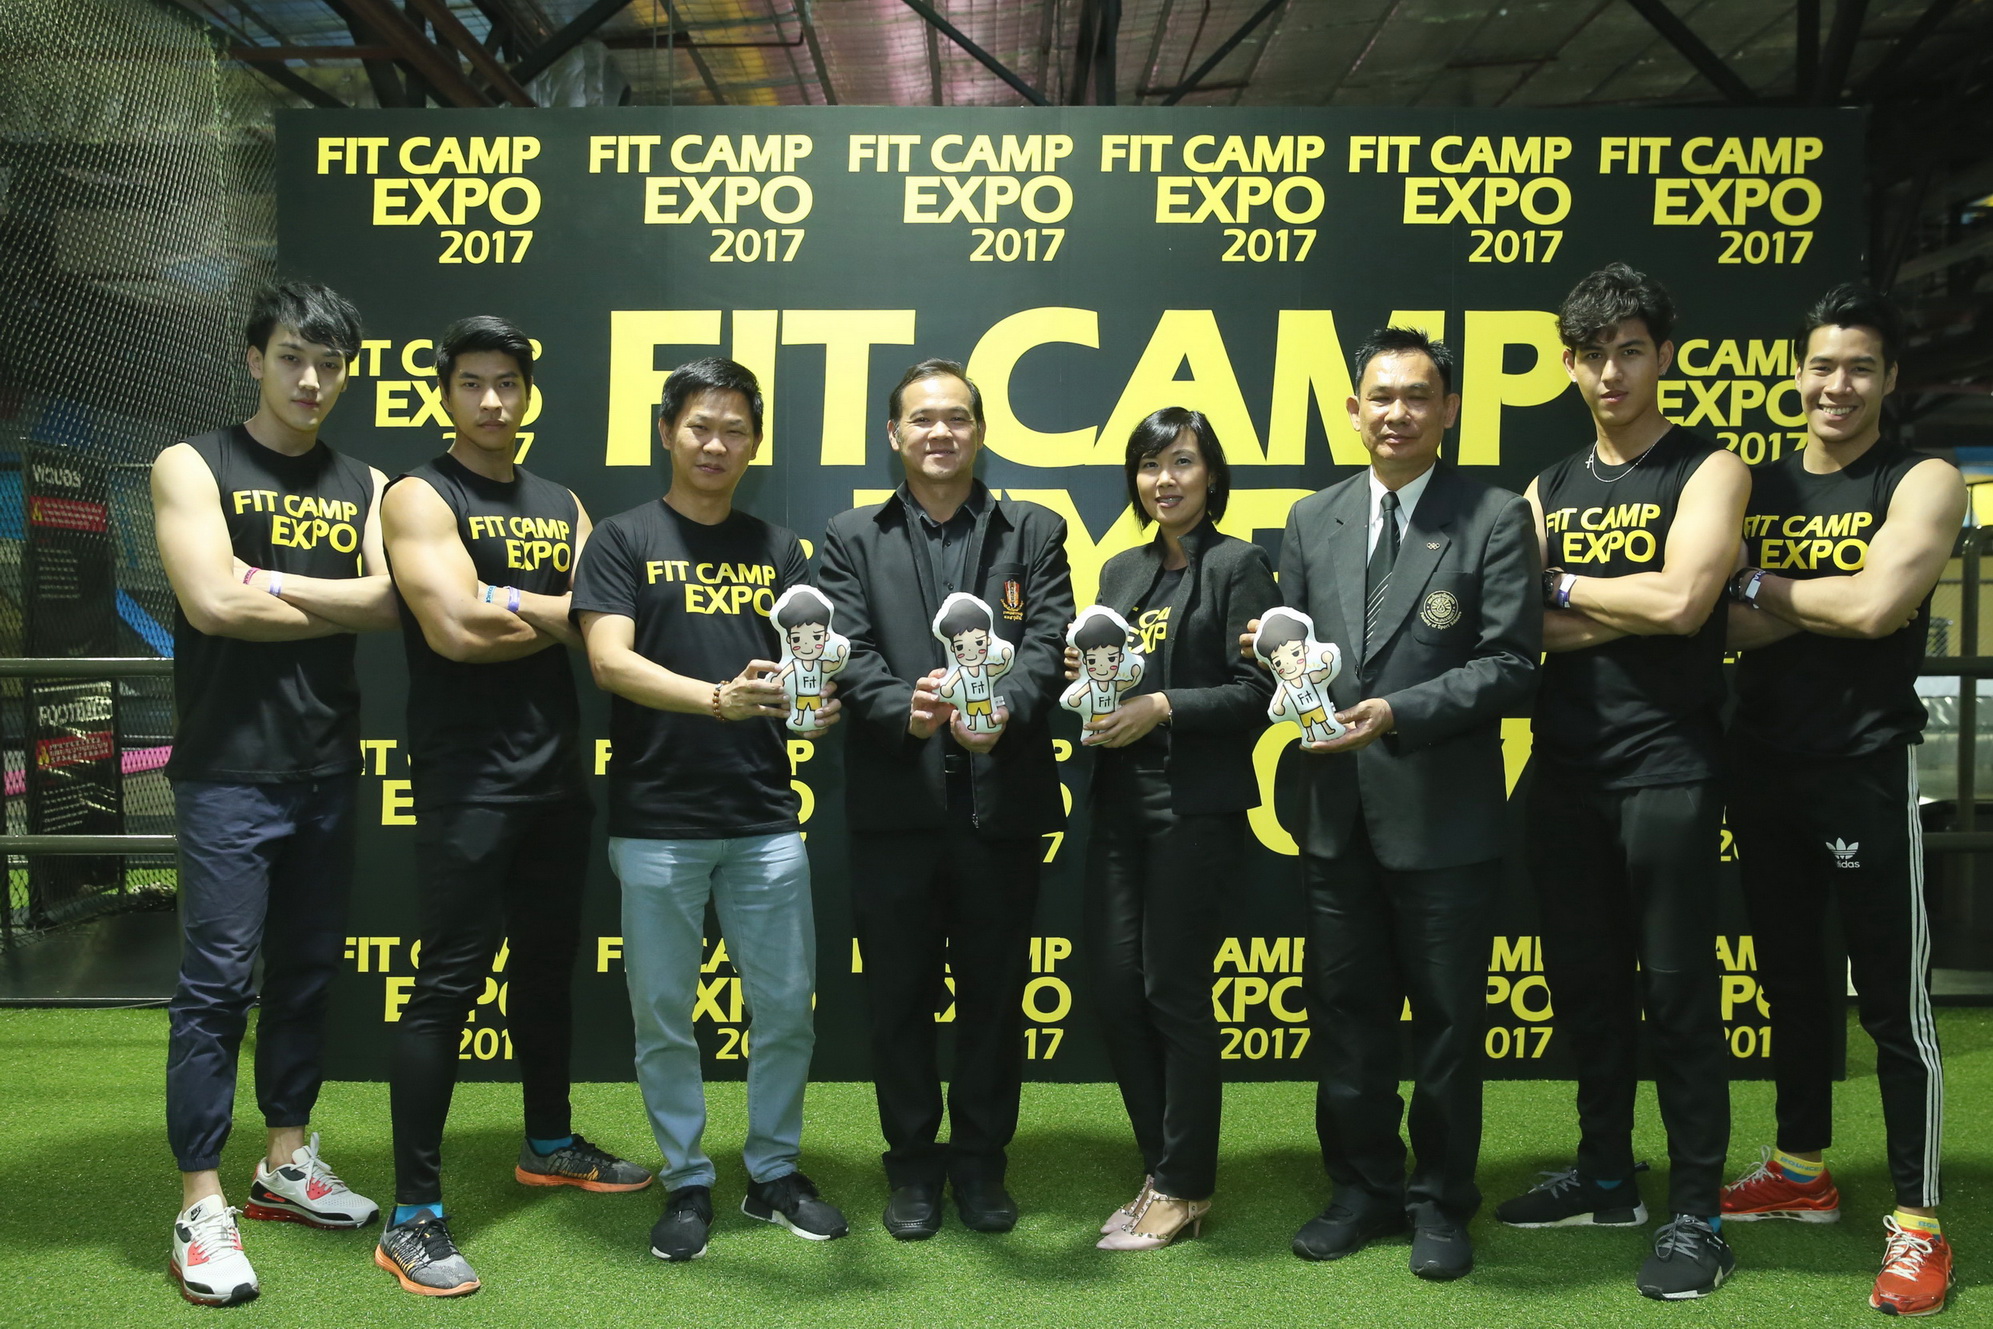 fit camp expo 2017